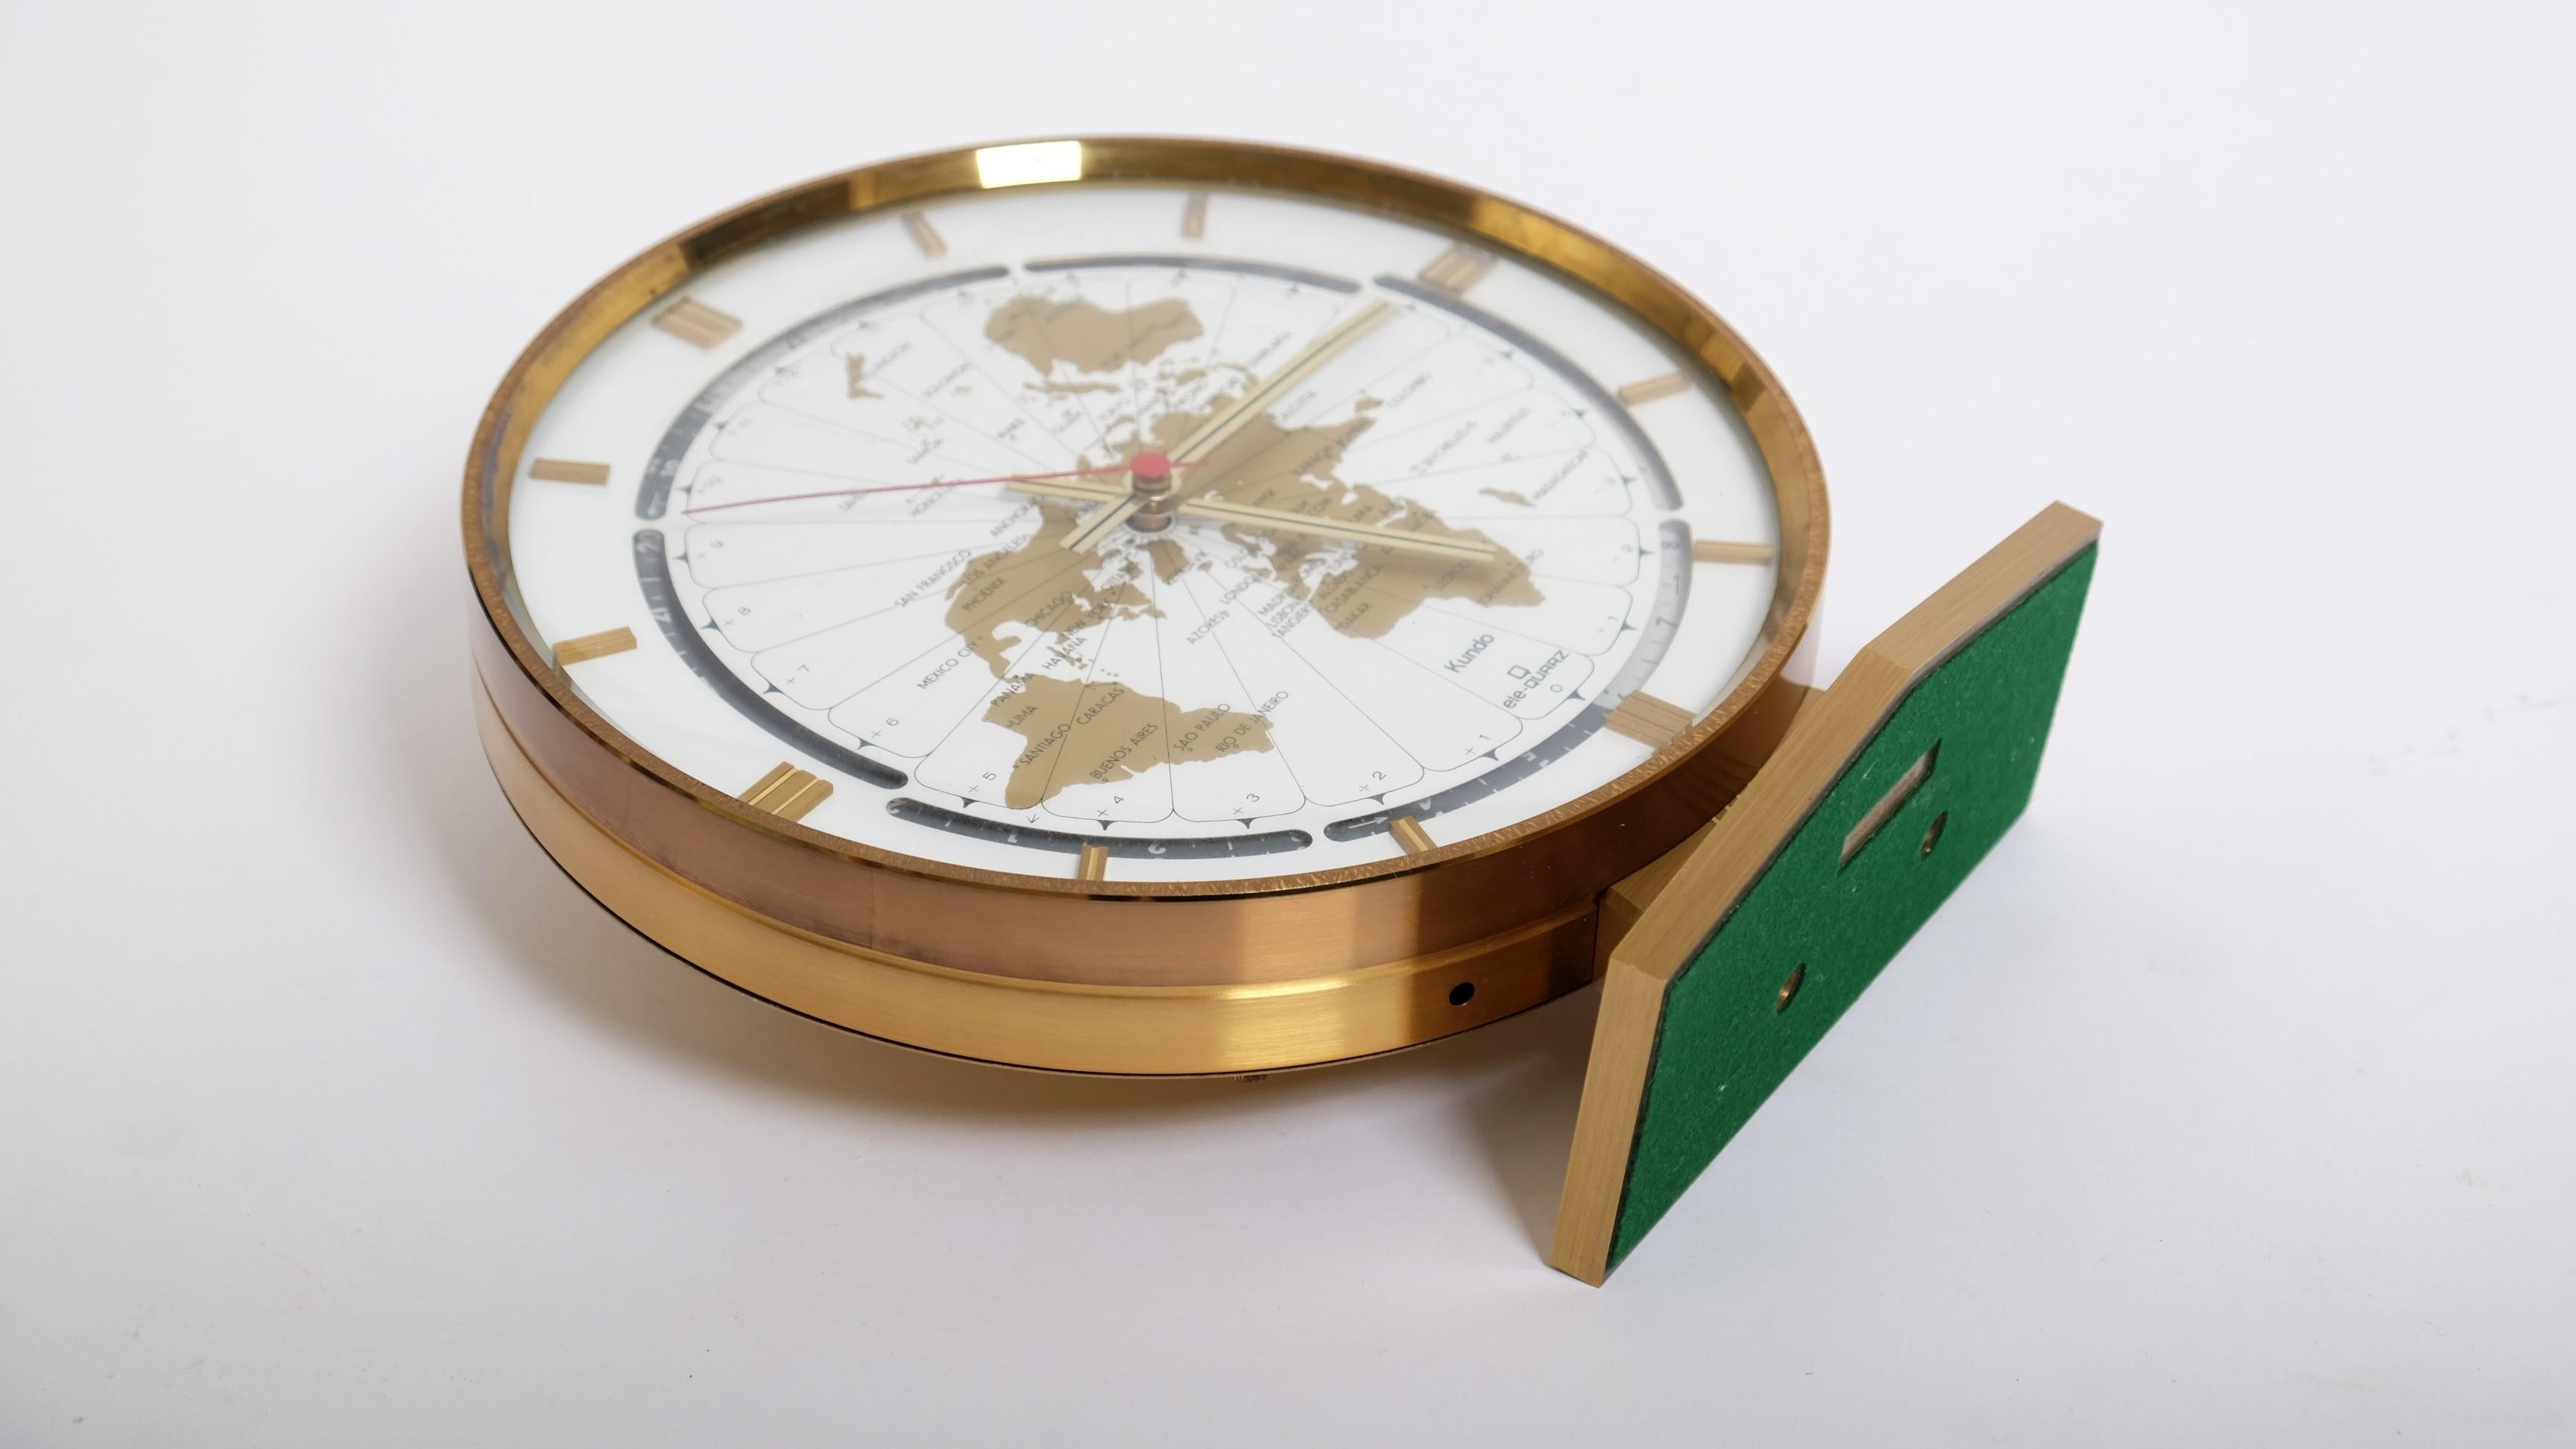 Large Brass Table World Time Zone Clock by Kundo / Kieninger & Obergfell, 1970s For Sale 10